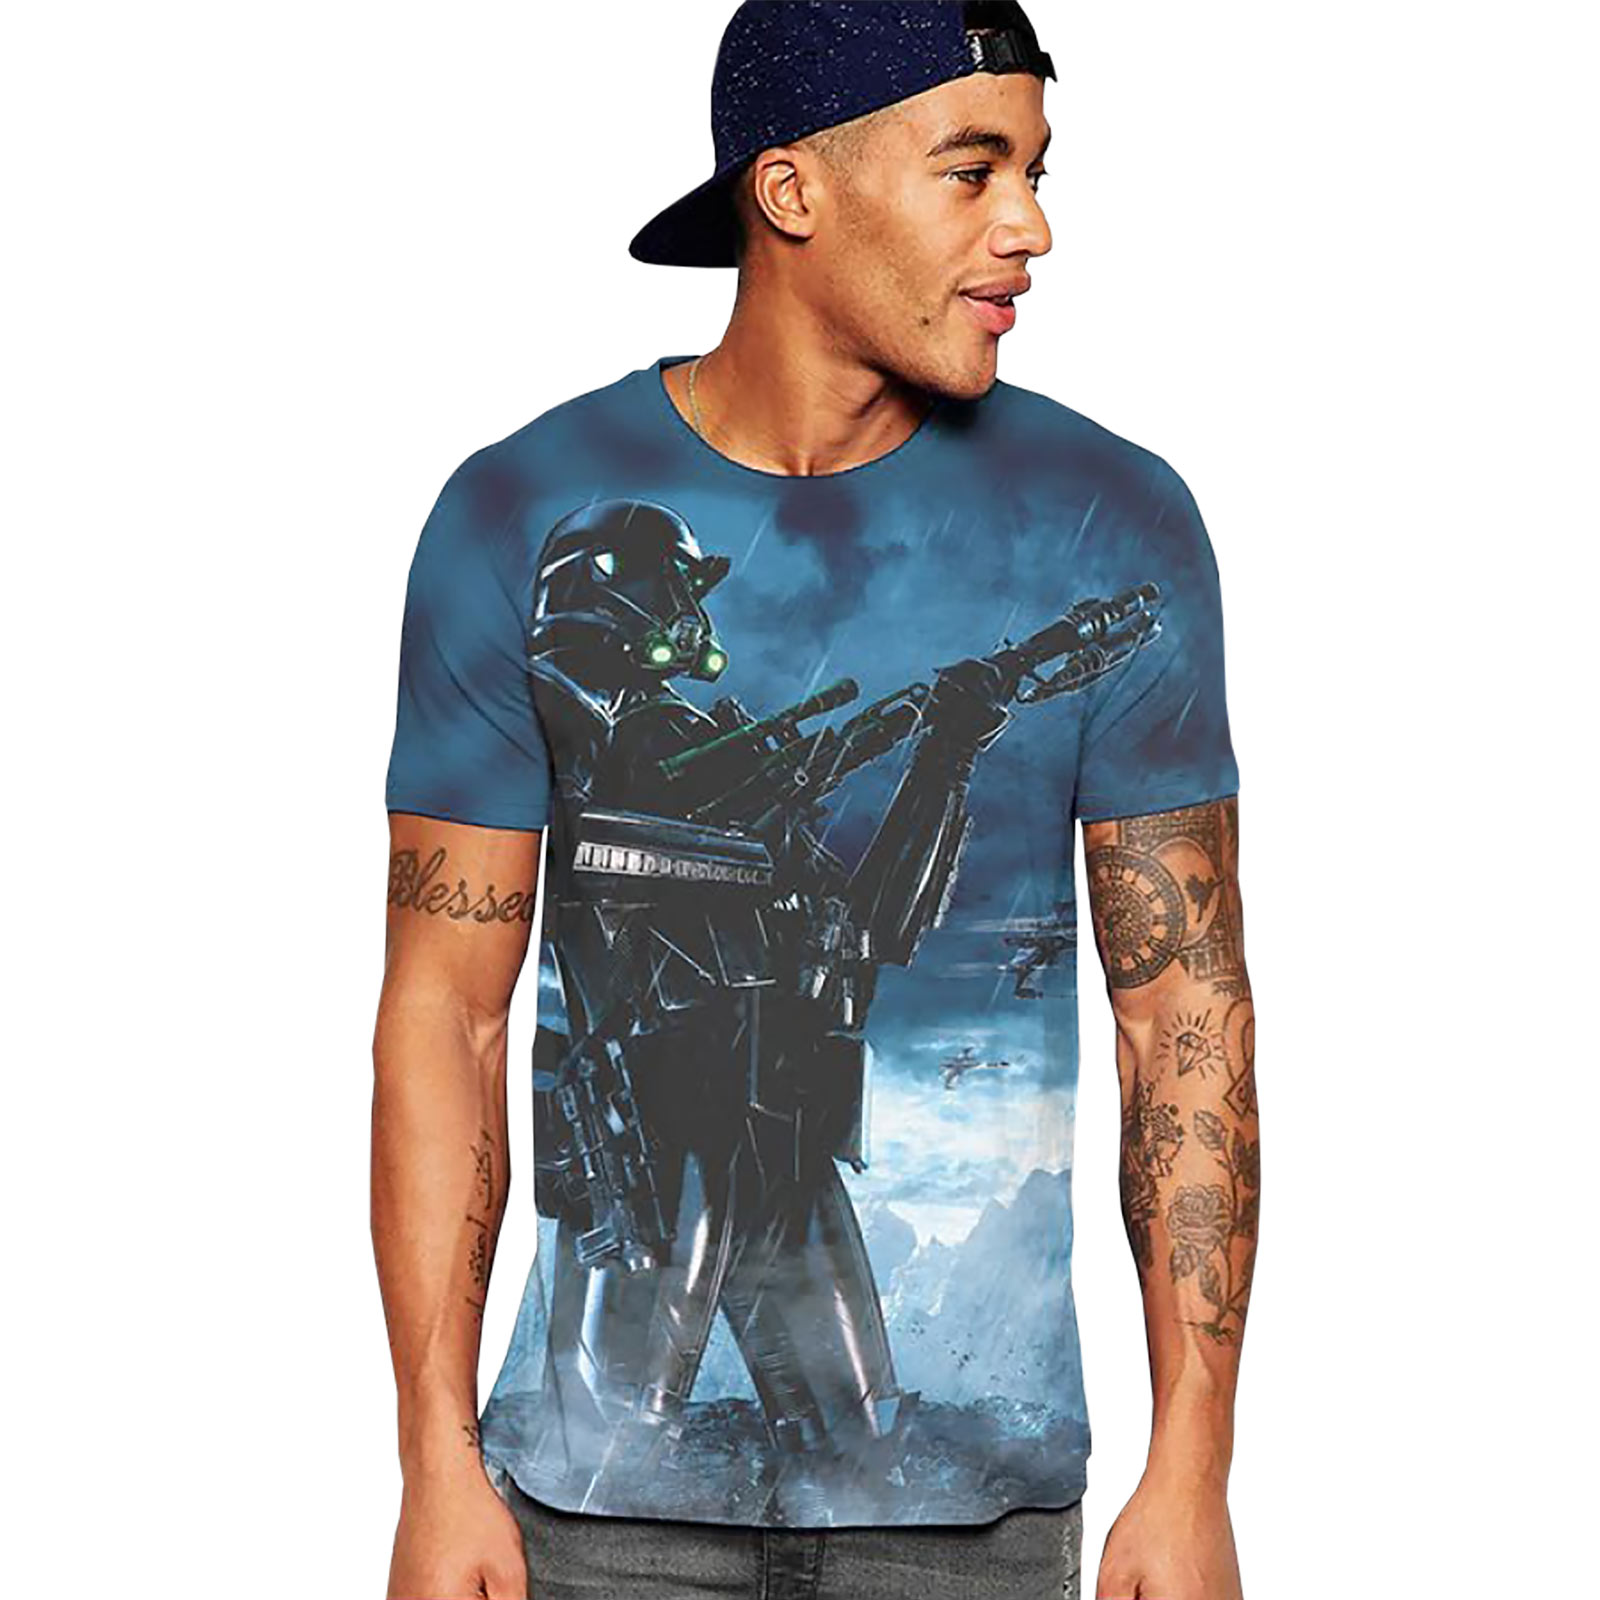 Rogue One T-Shirt - Death Trooper Pose Star Wars